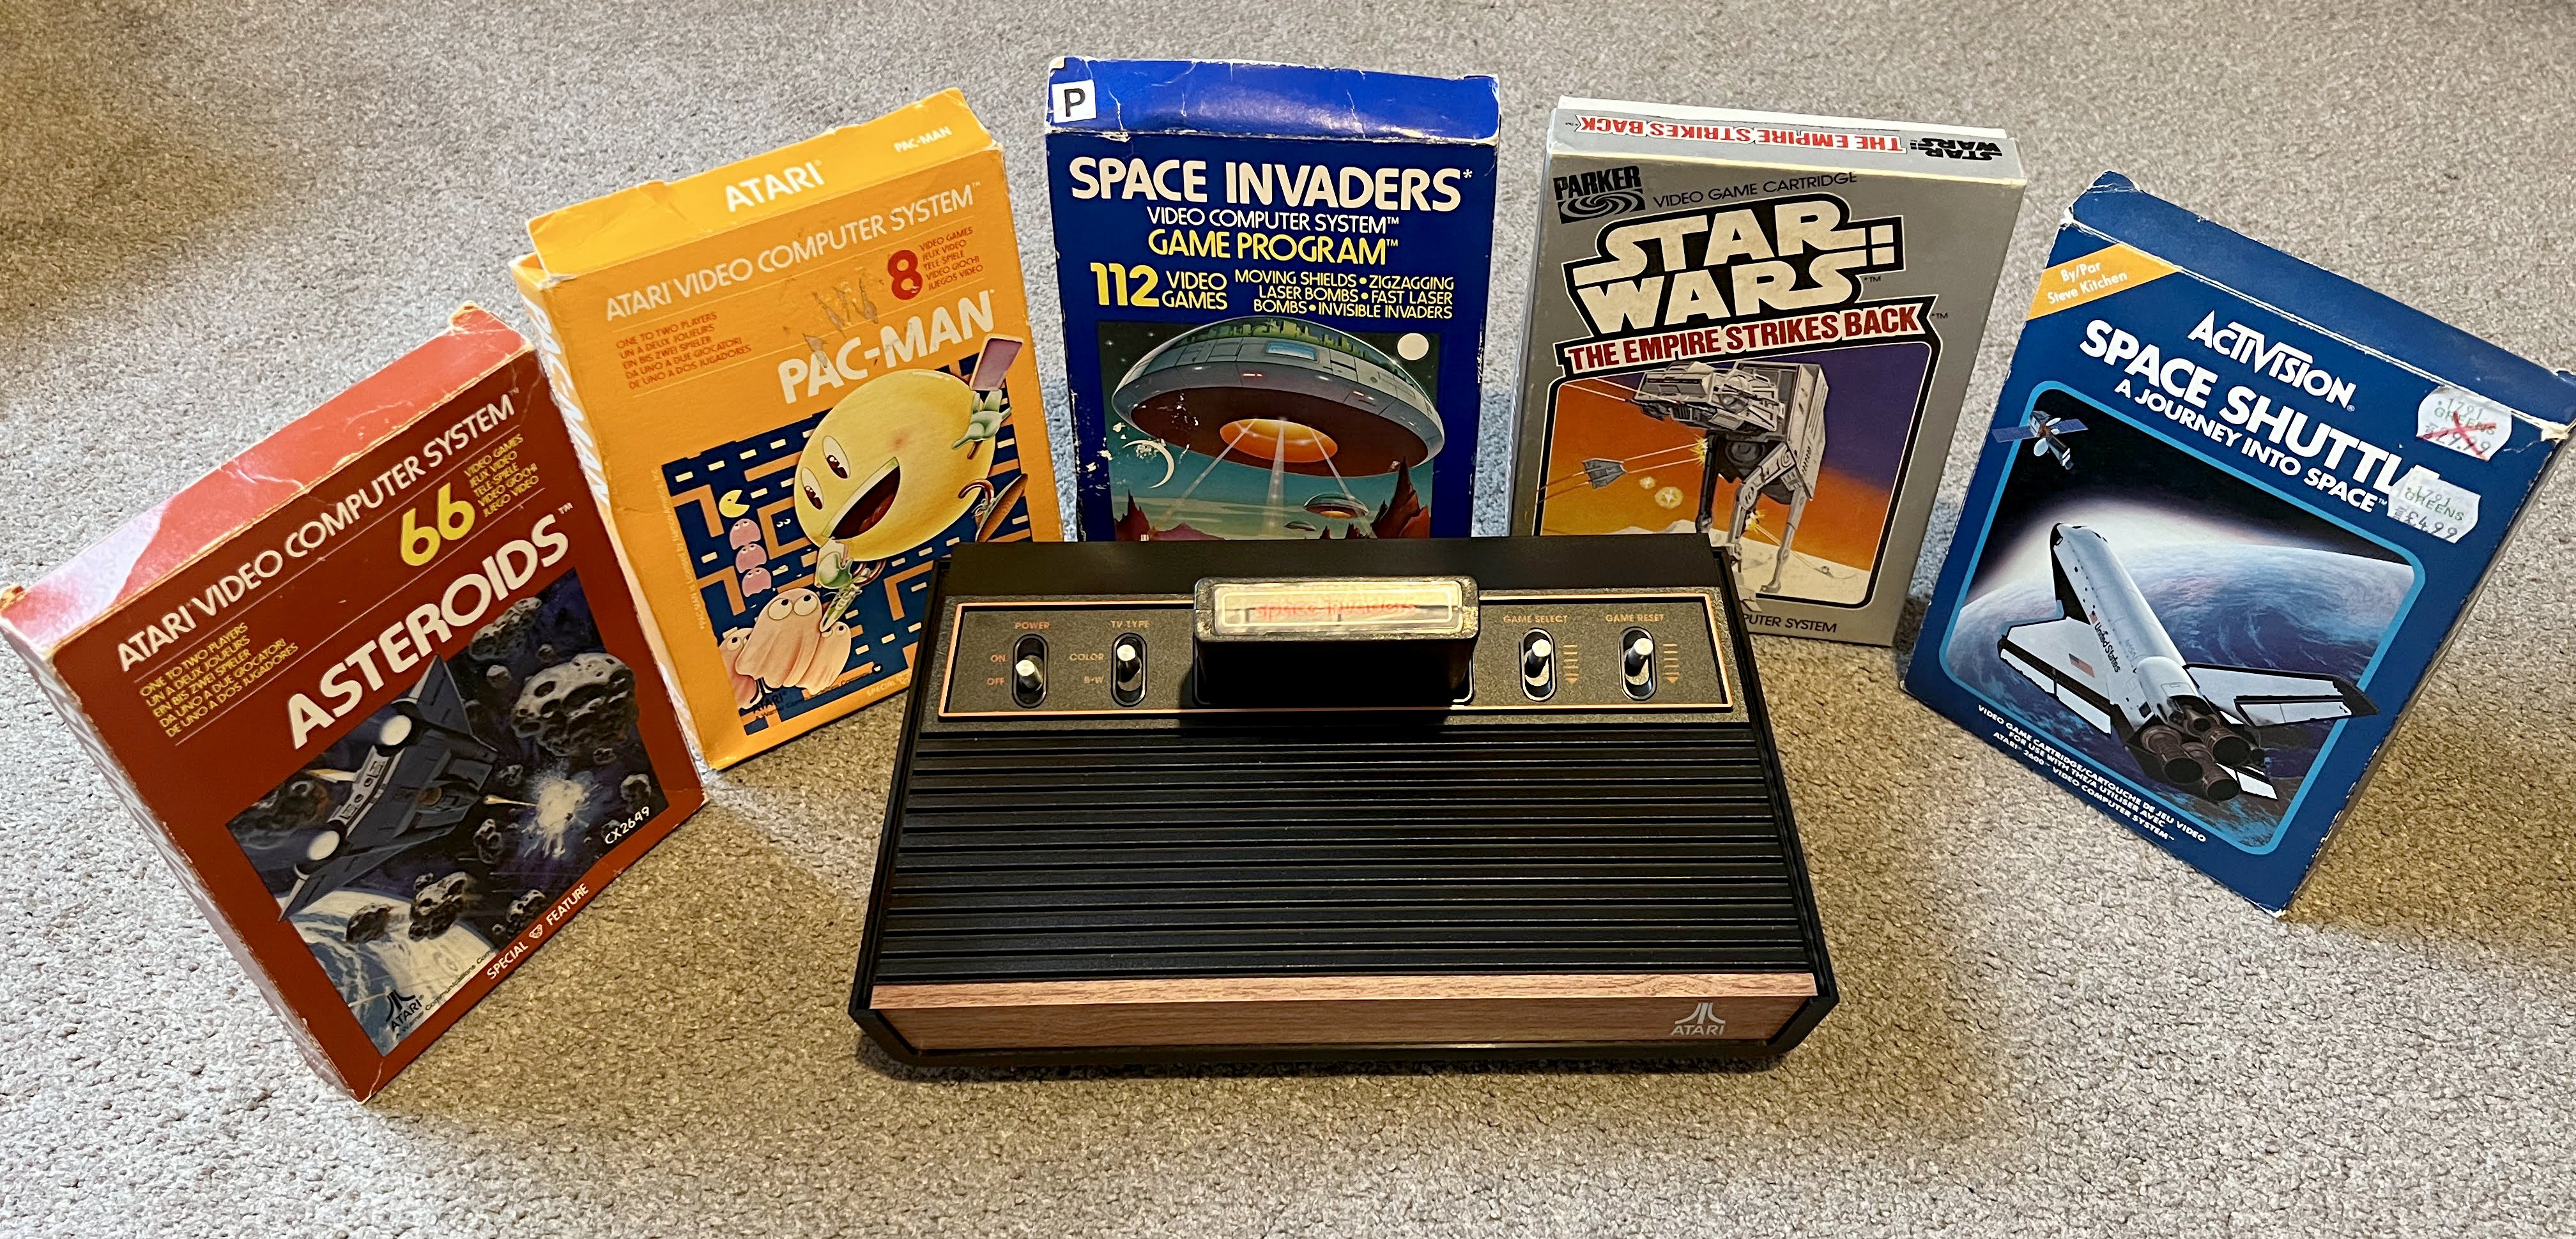 Review: The Atari 2600+ is a stubbornly faithful recreation of a